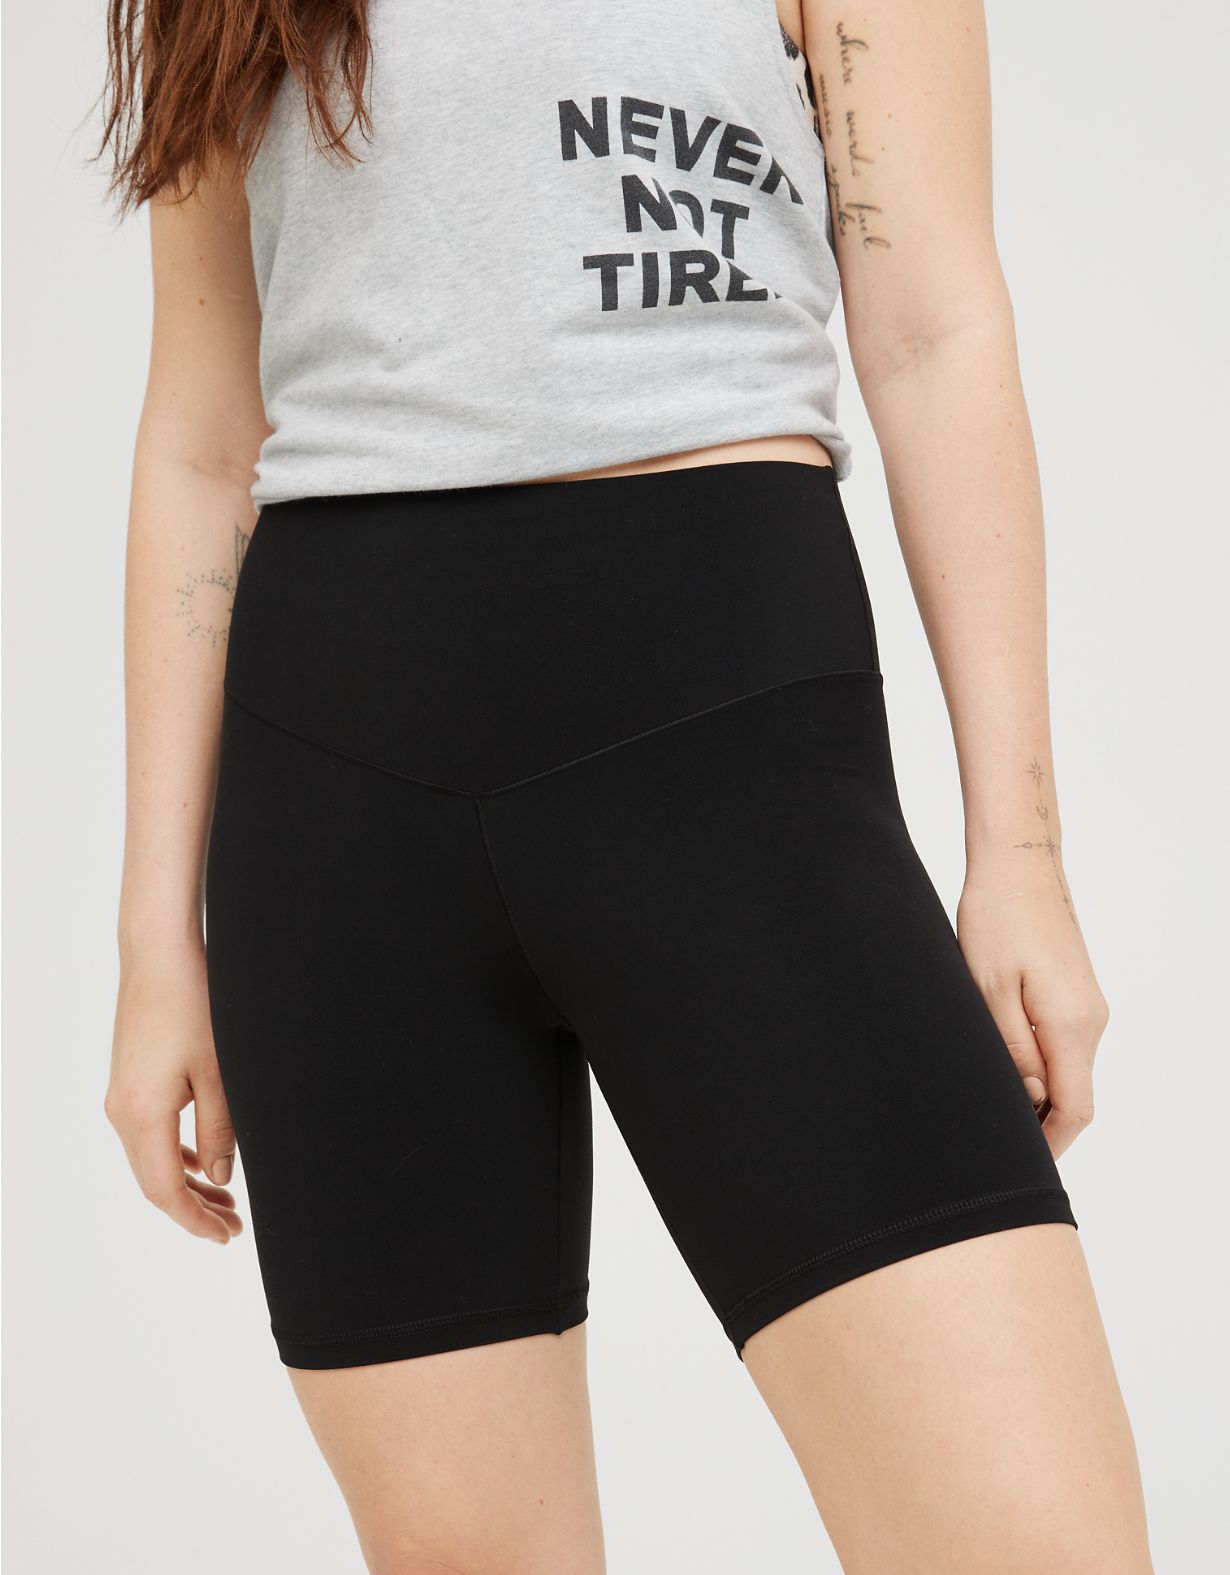 OFFLINE By Aerie Real Me High Waisted 7" Bike Short